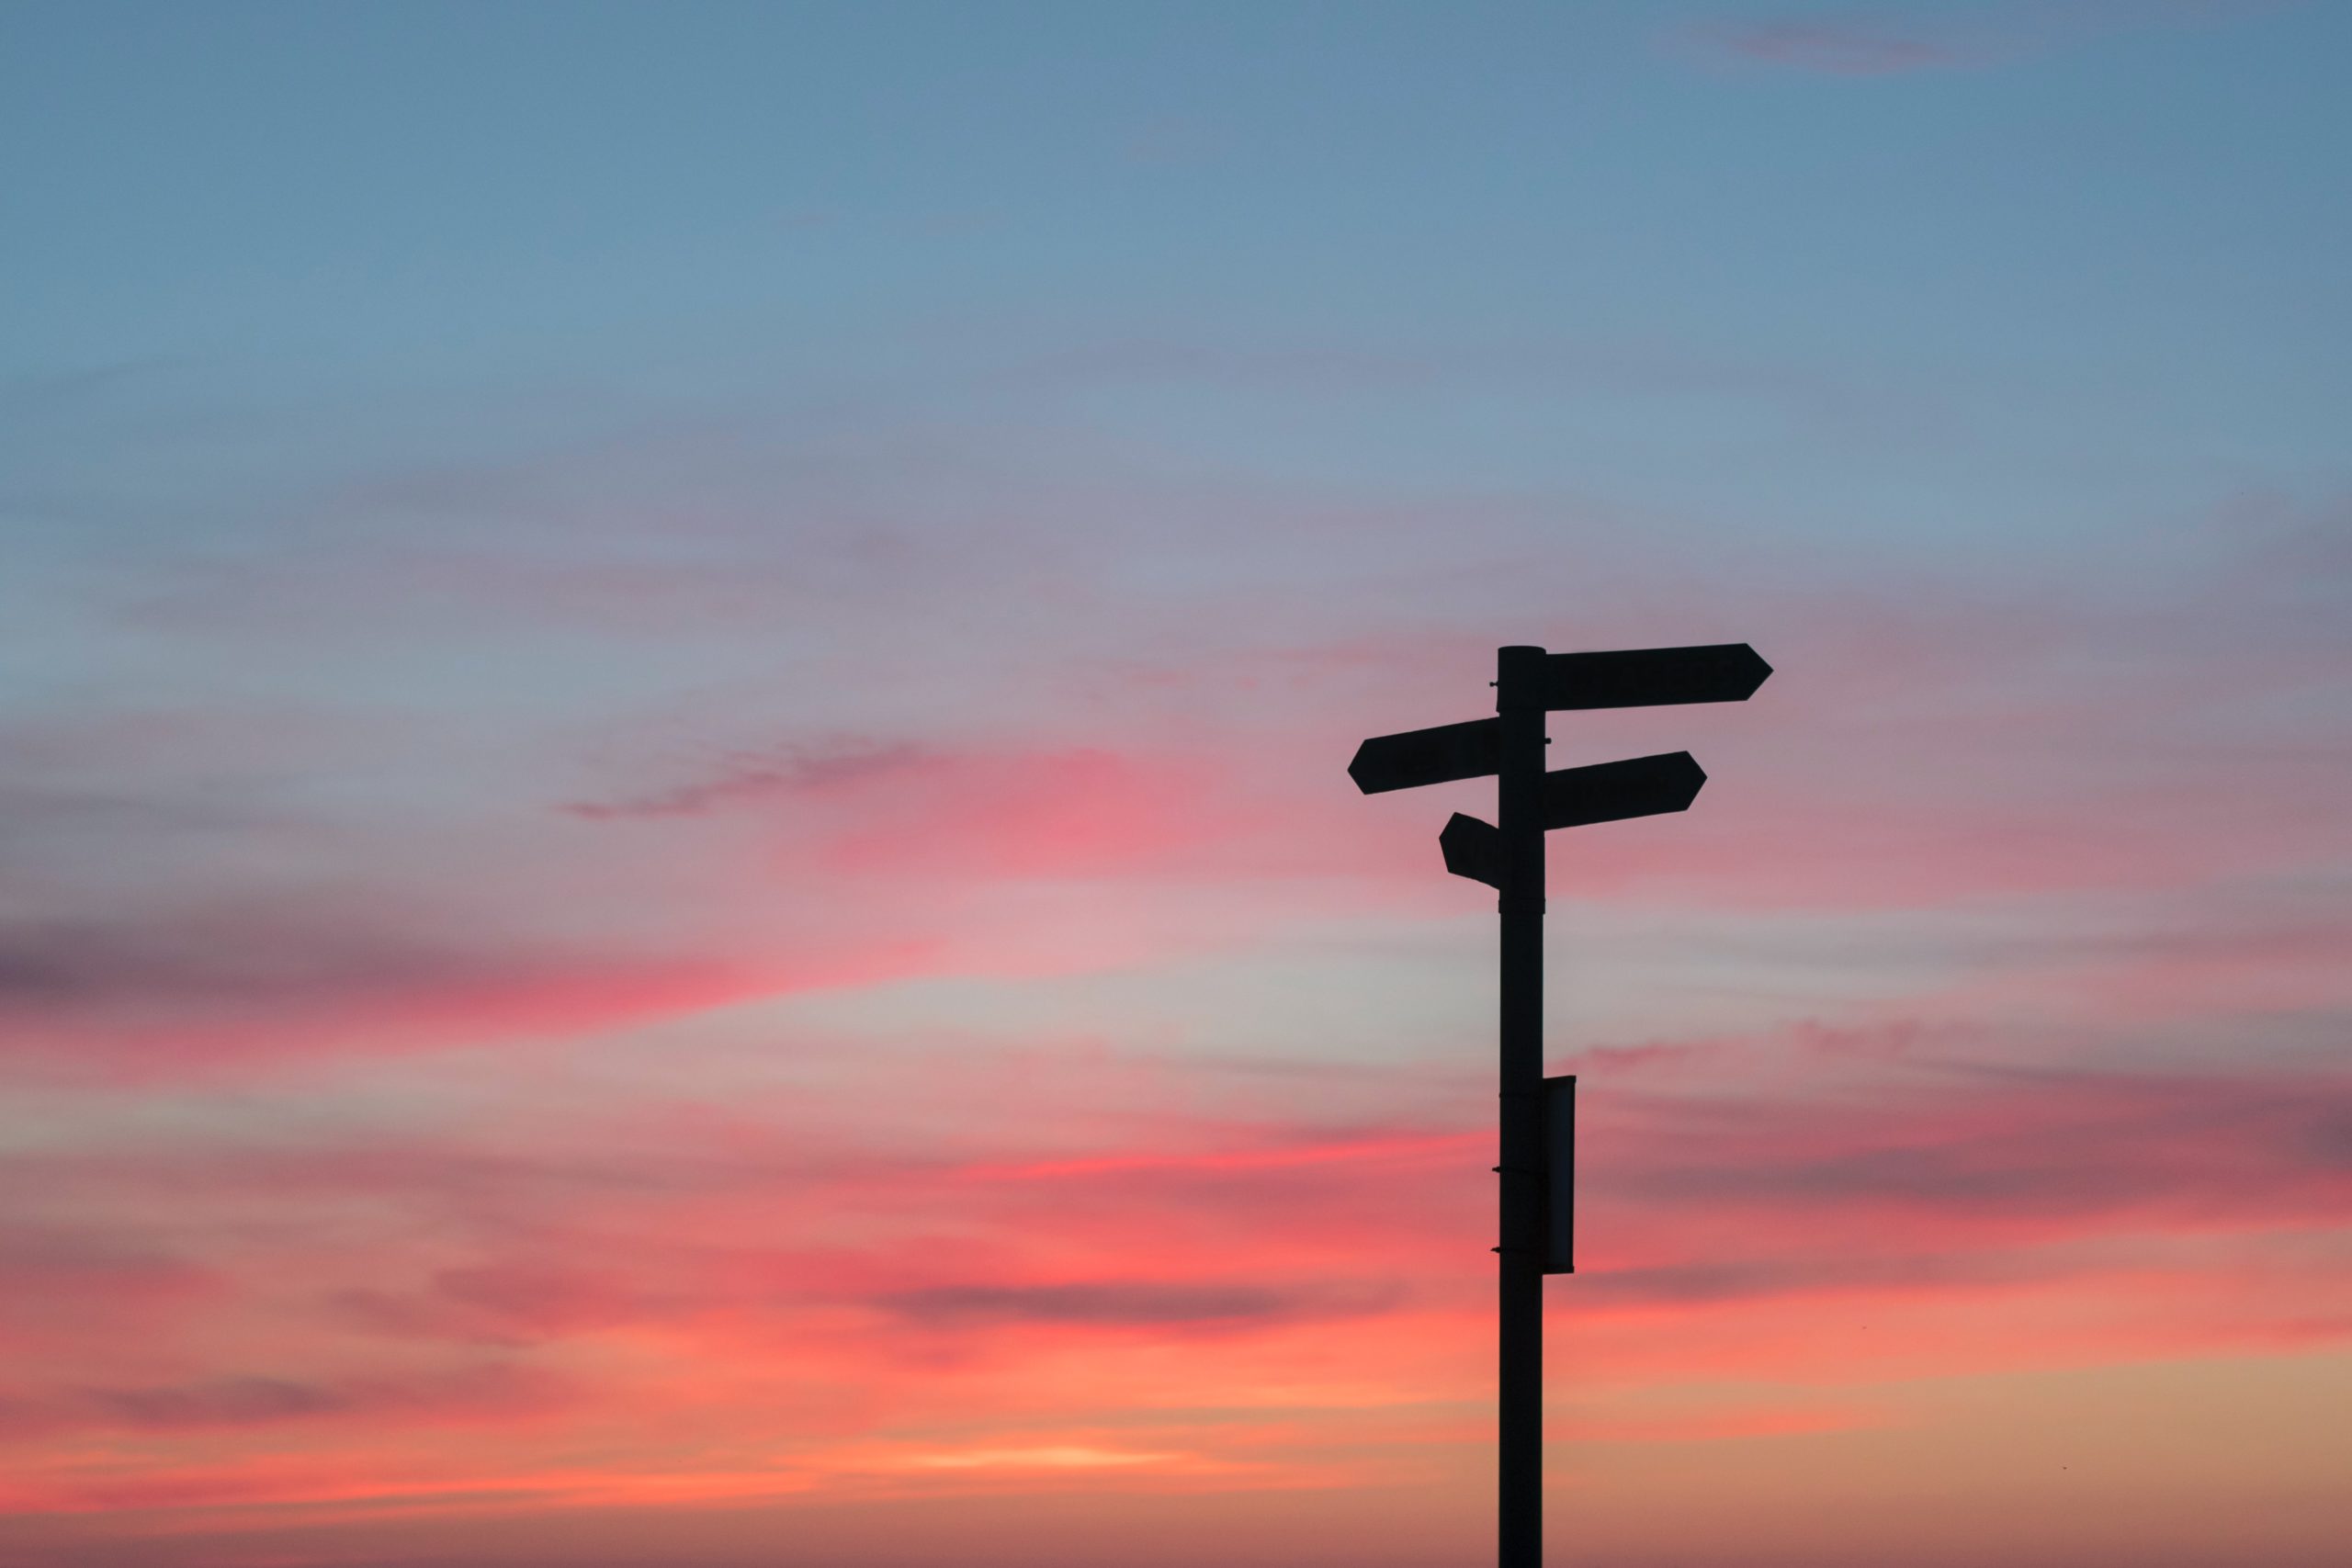 Signposts in silhouete with sunset skys in background